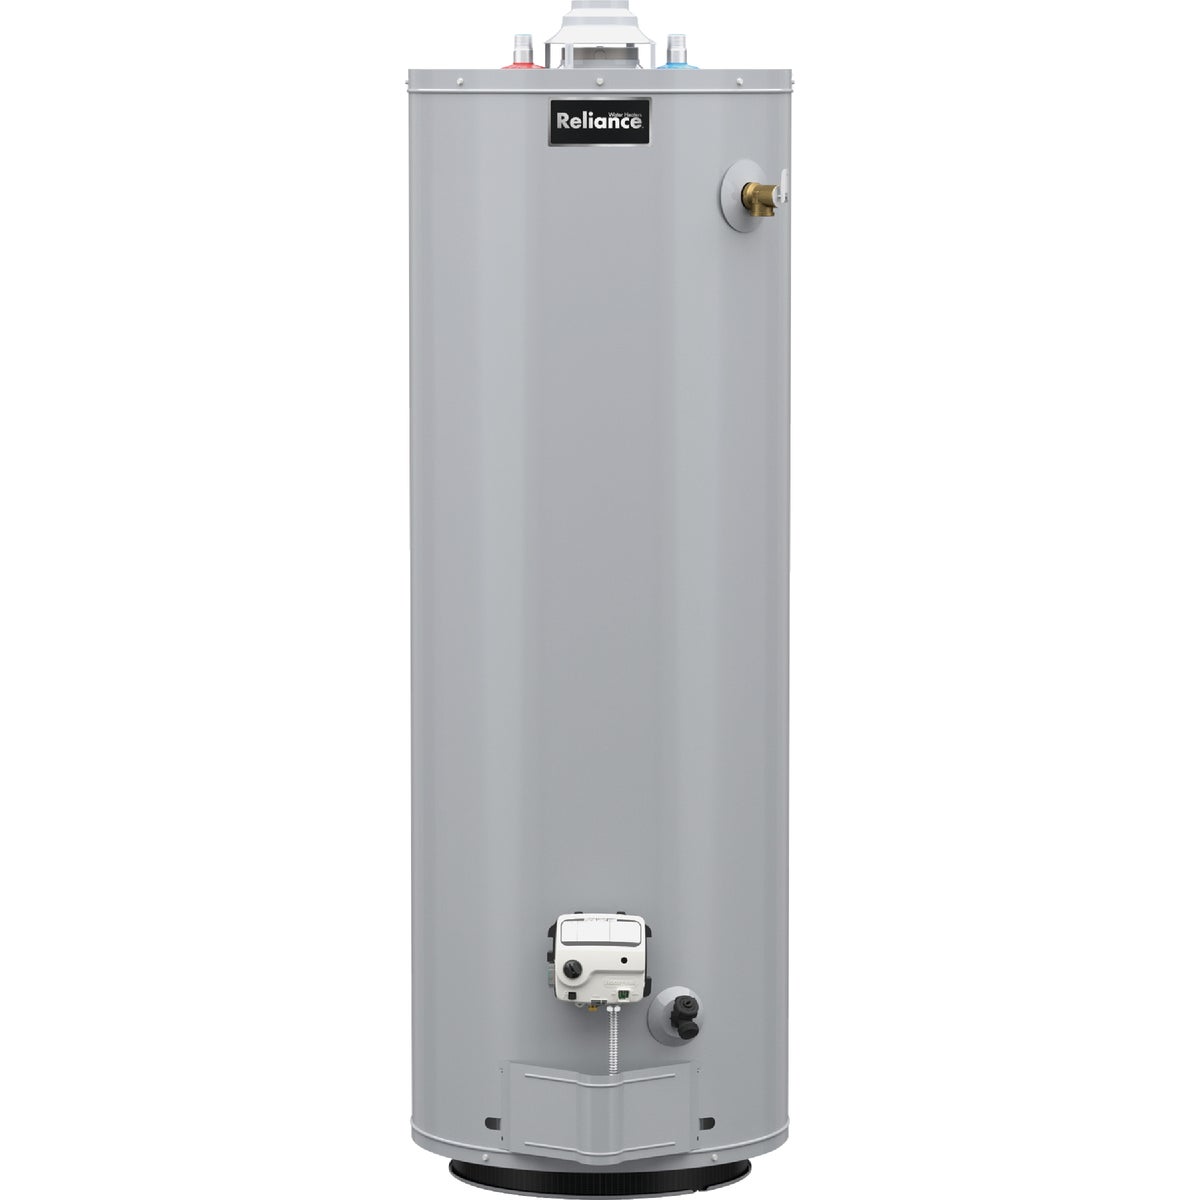 Item 401898, Natural gas water heater, 2 In. insulation.